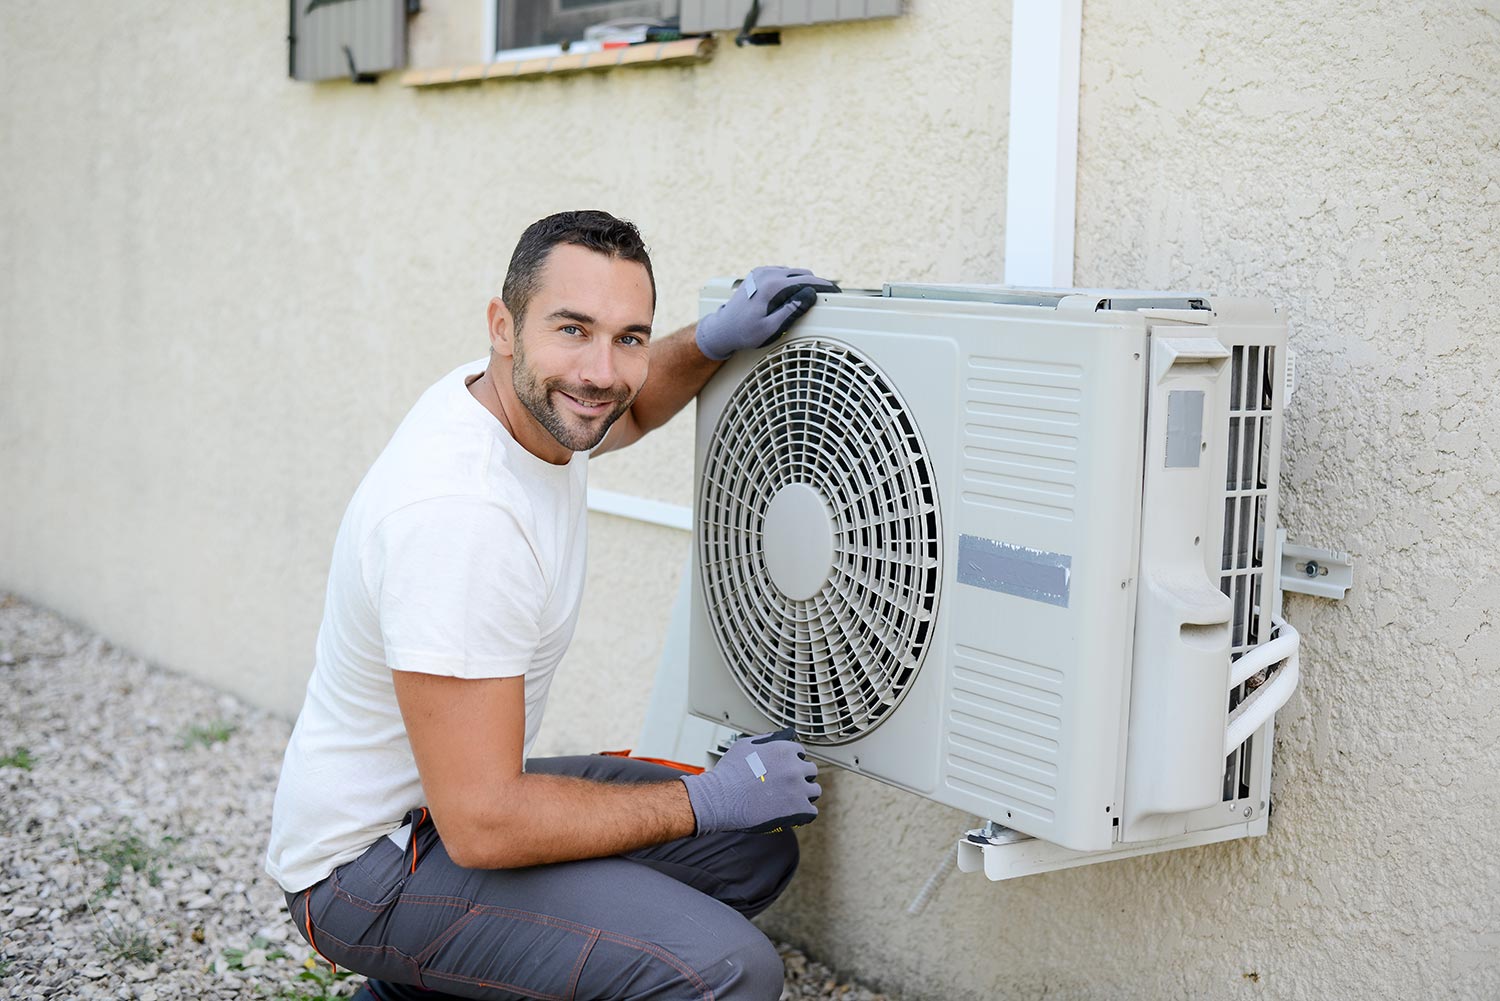 Handsome young man electrician installing an air conditioning